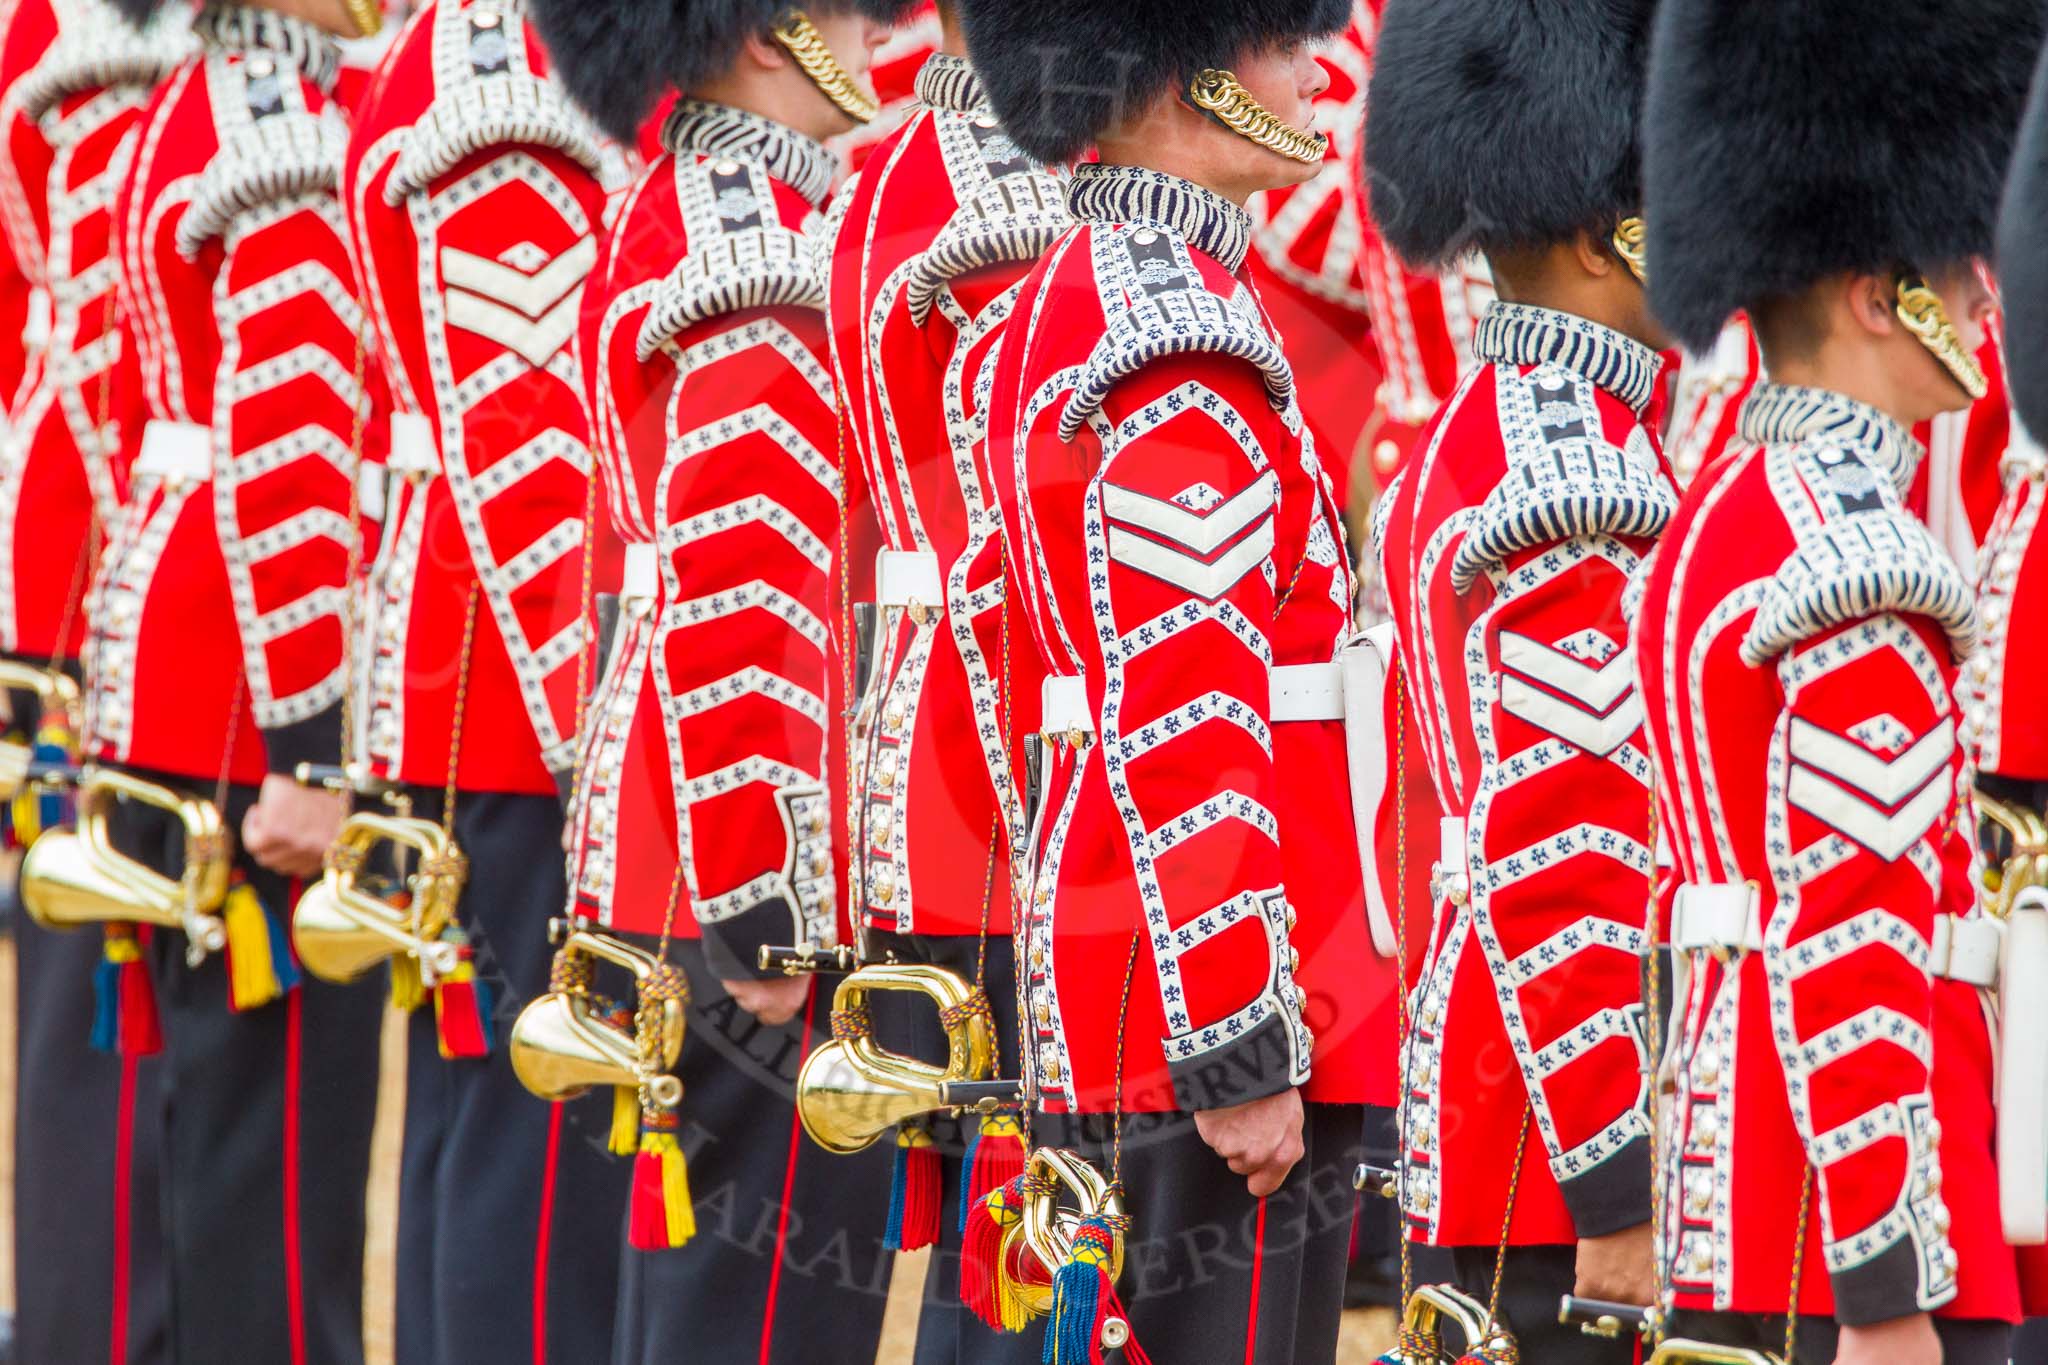 Trooping the Colour 2014.
Horse Guards Parade, Westminster,
London SW1A,

United Kingdom,
on 14 June 2014 at 11:15, image #490